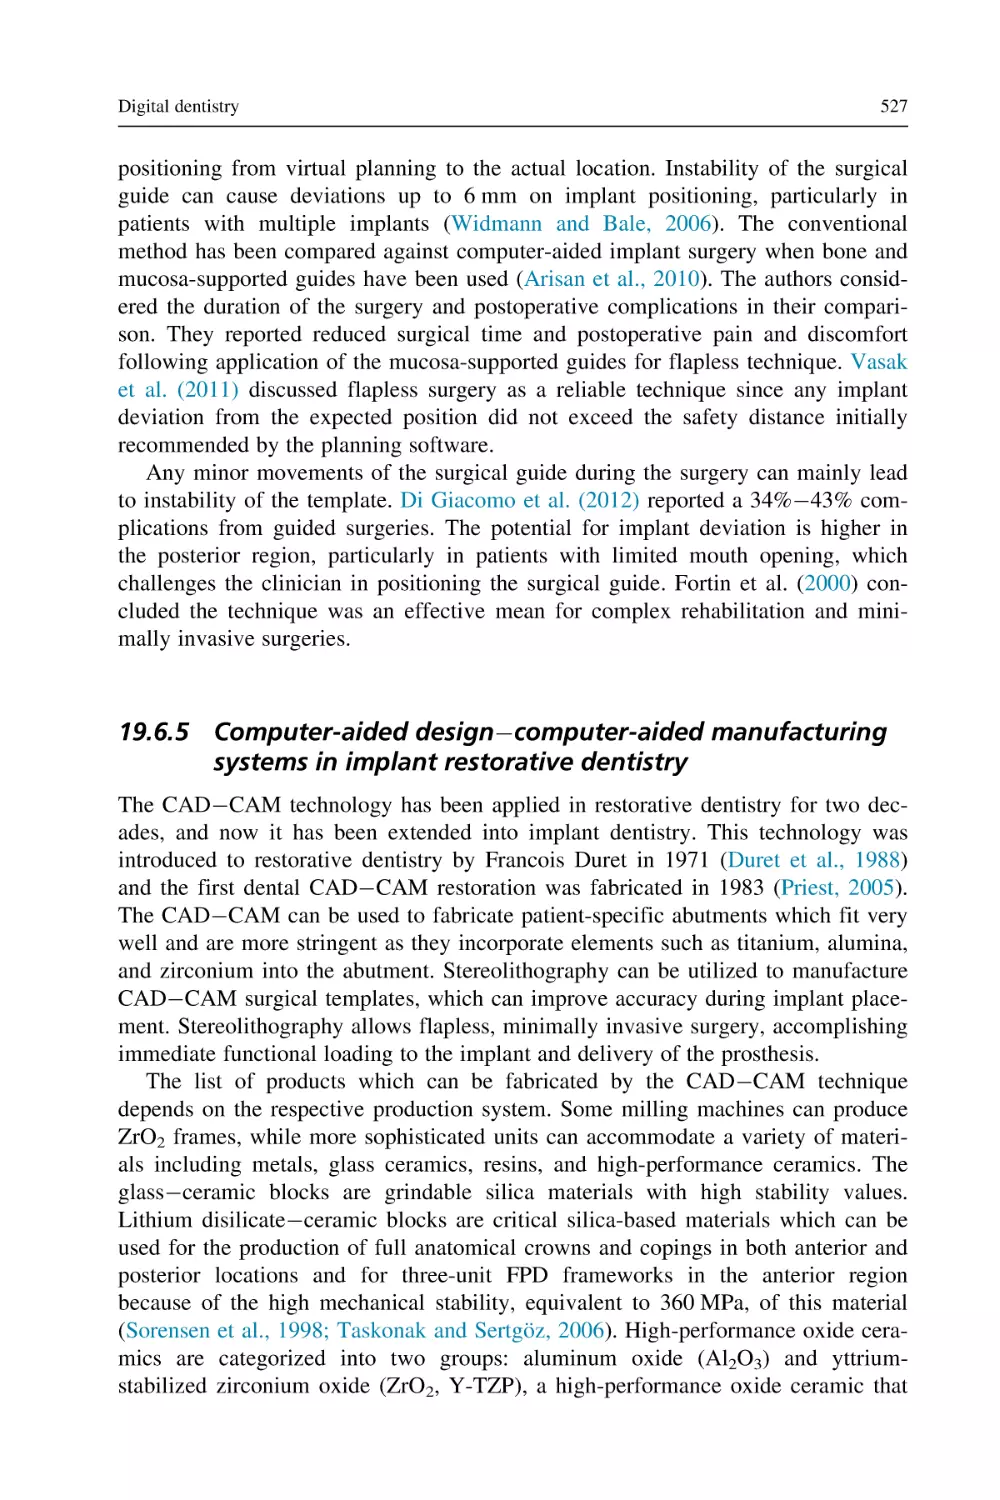 19.6.5 Computer-aided design–computer-aided manufacturing systems in implant restorative dentistry